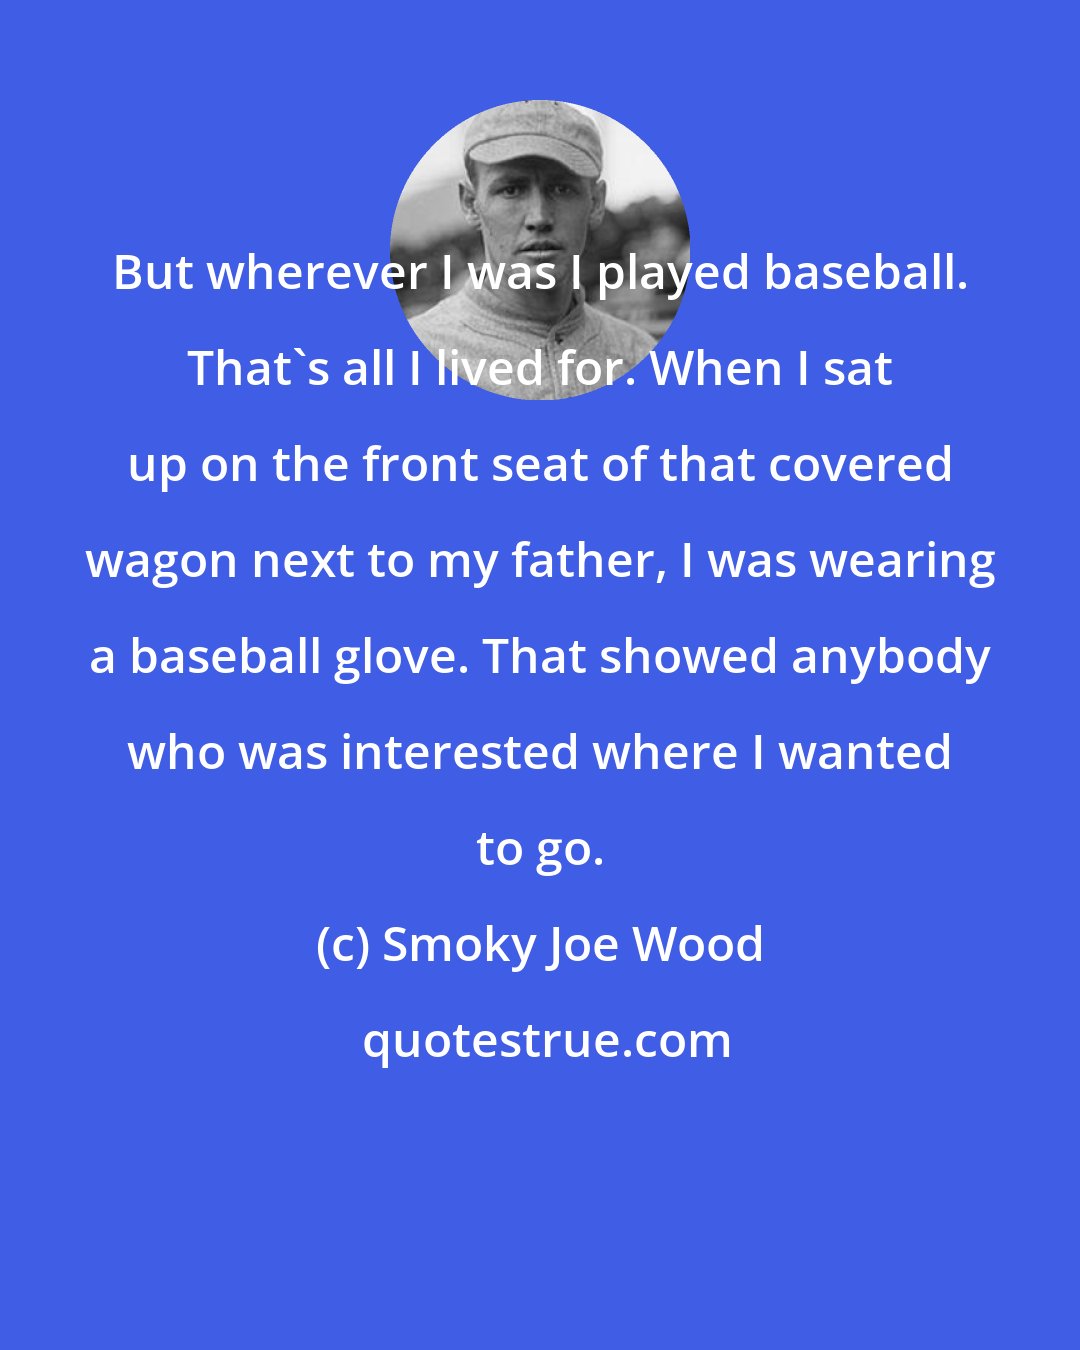 Smoky Joe Wood: But wherever I was I played baseball. That's all I lived for. When I sat up on the front seat of that covered wagon next to my father, I was wearing a baseball glove. That showed anybody who was interested where I wanted to go.